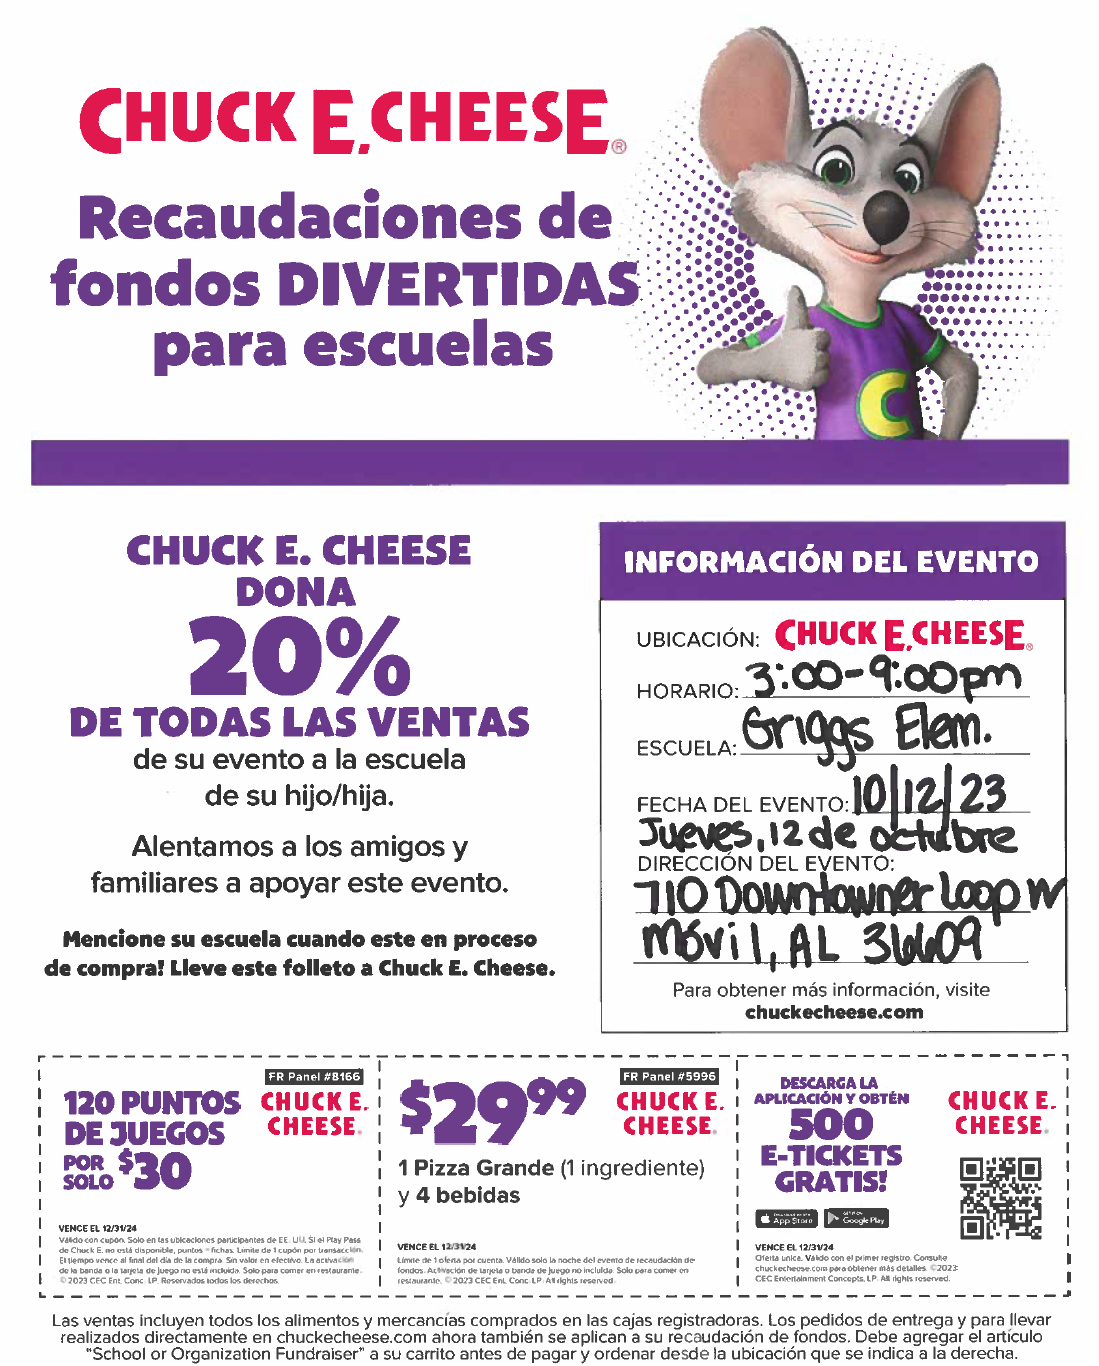 Chuck E. Cheese flyer in Spanish